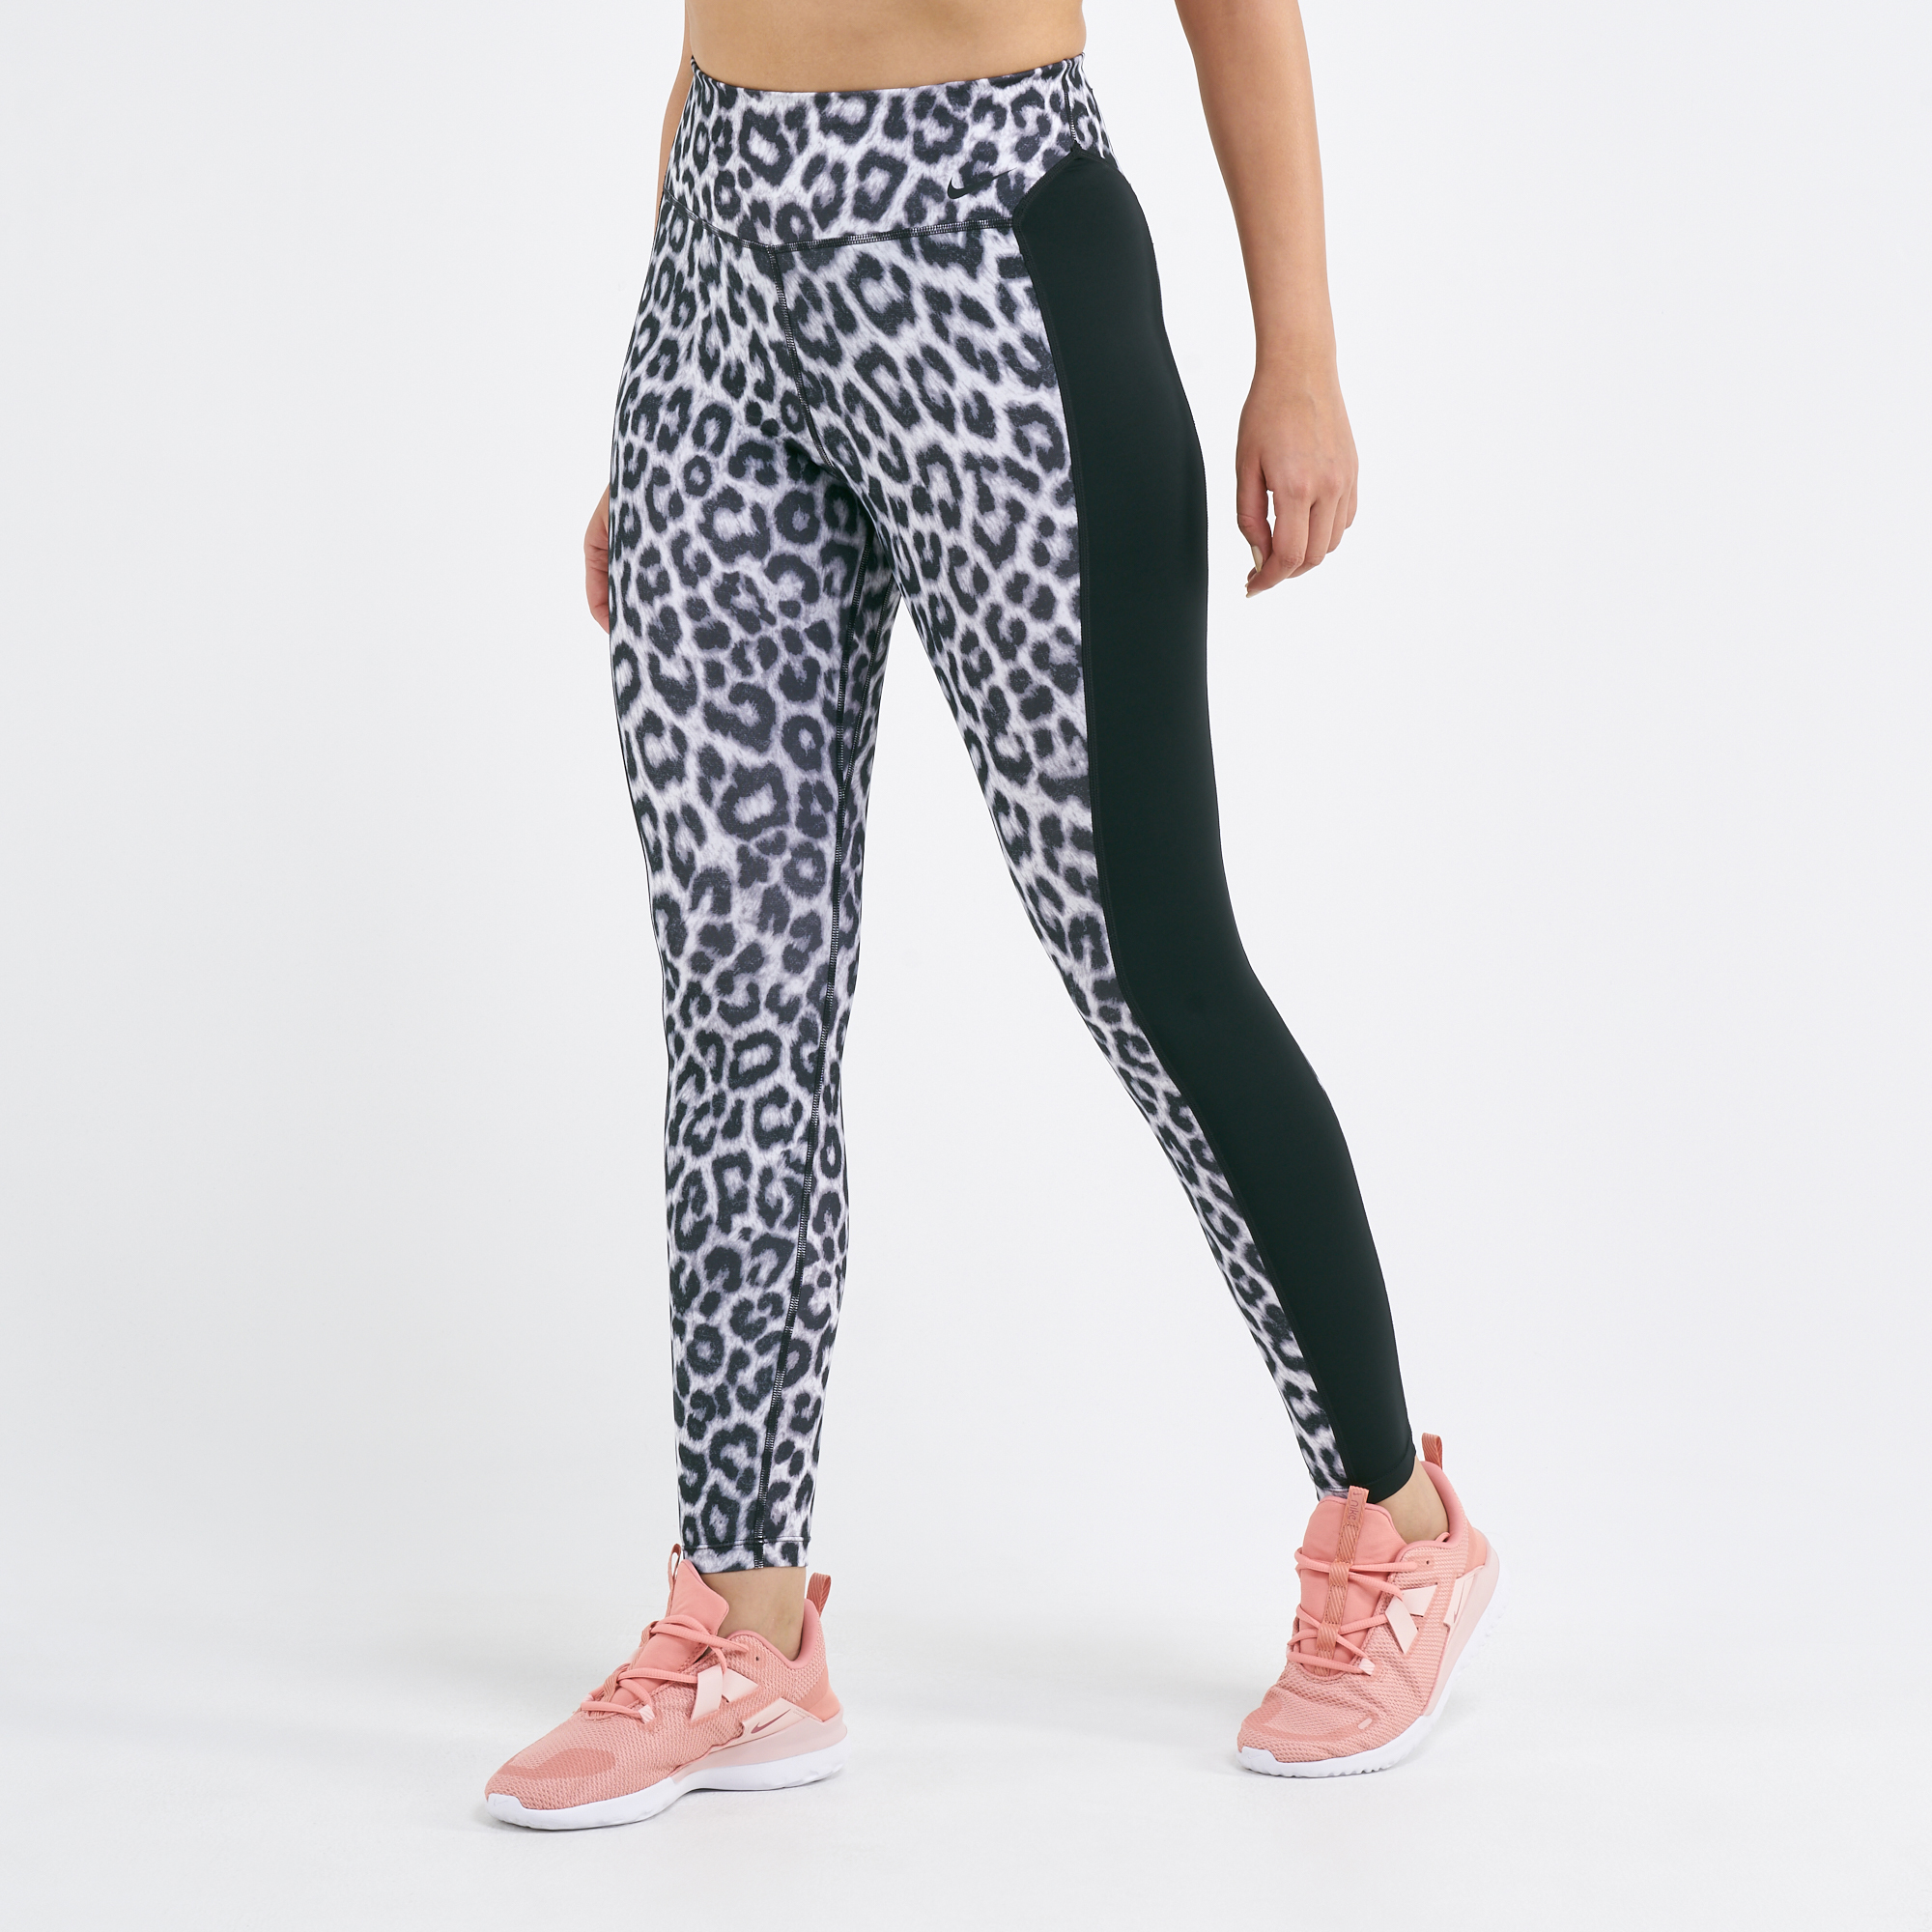 nike one leopard tights